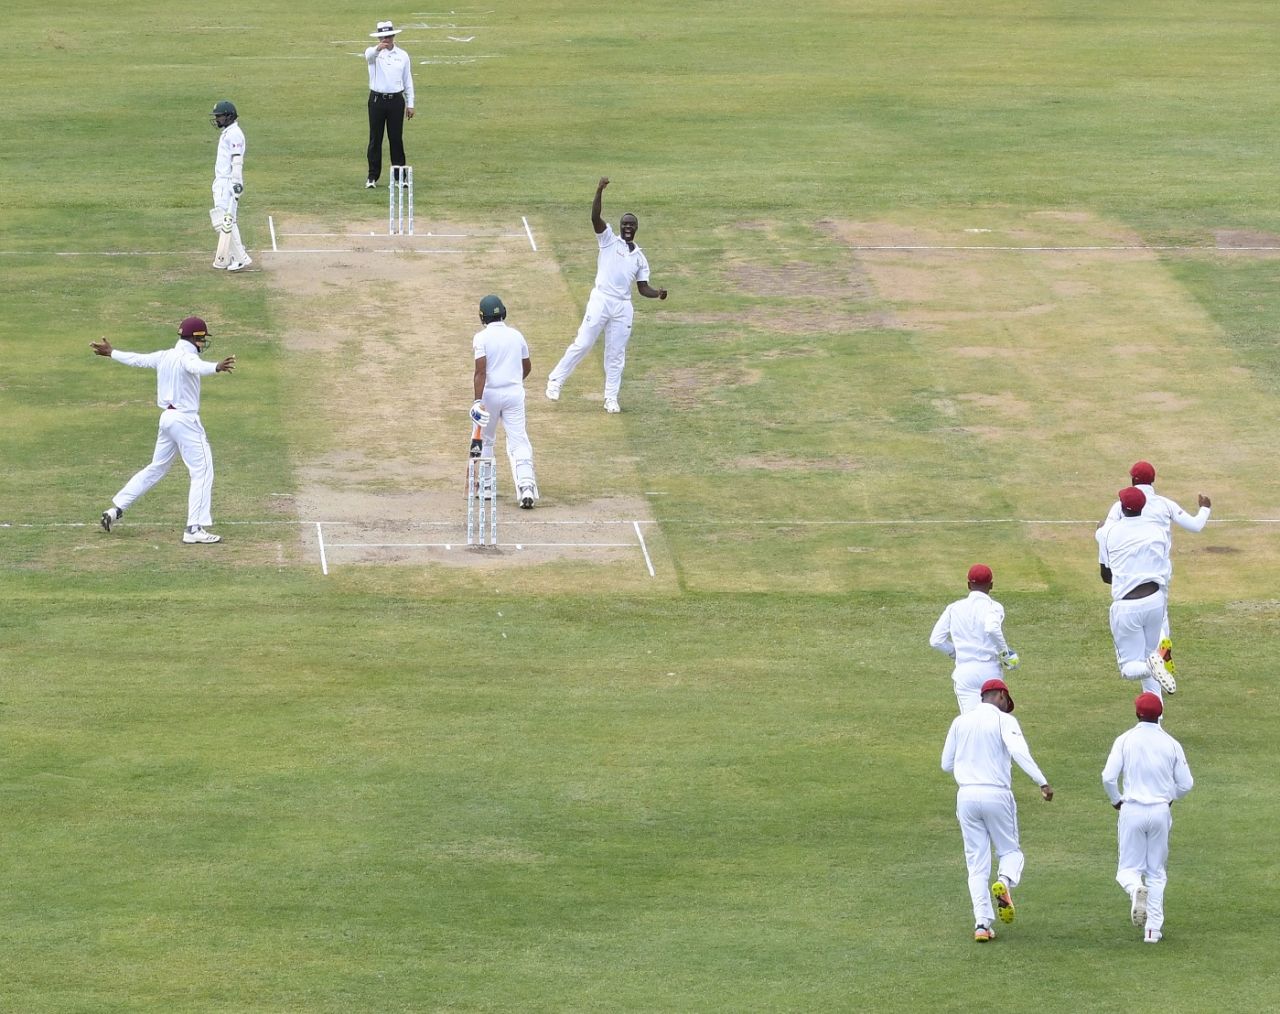 Kemar Roach was unstoppable, West Indies v Bangladesh, 1st Test, North Sound, 1st day, July 4, 2018